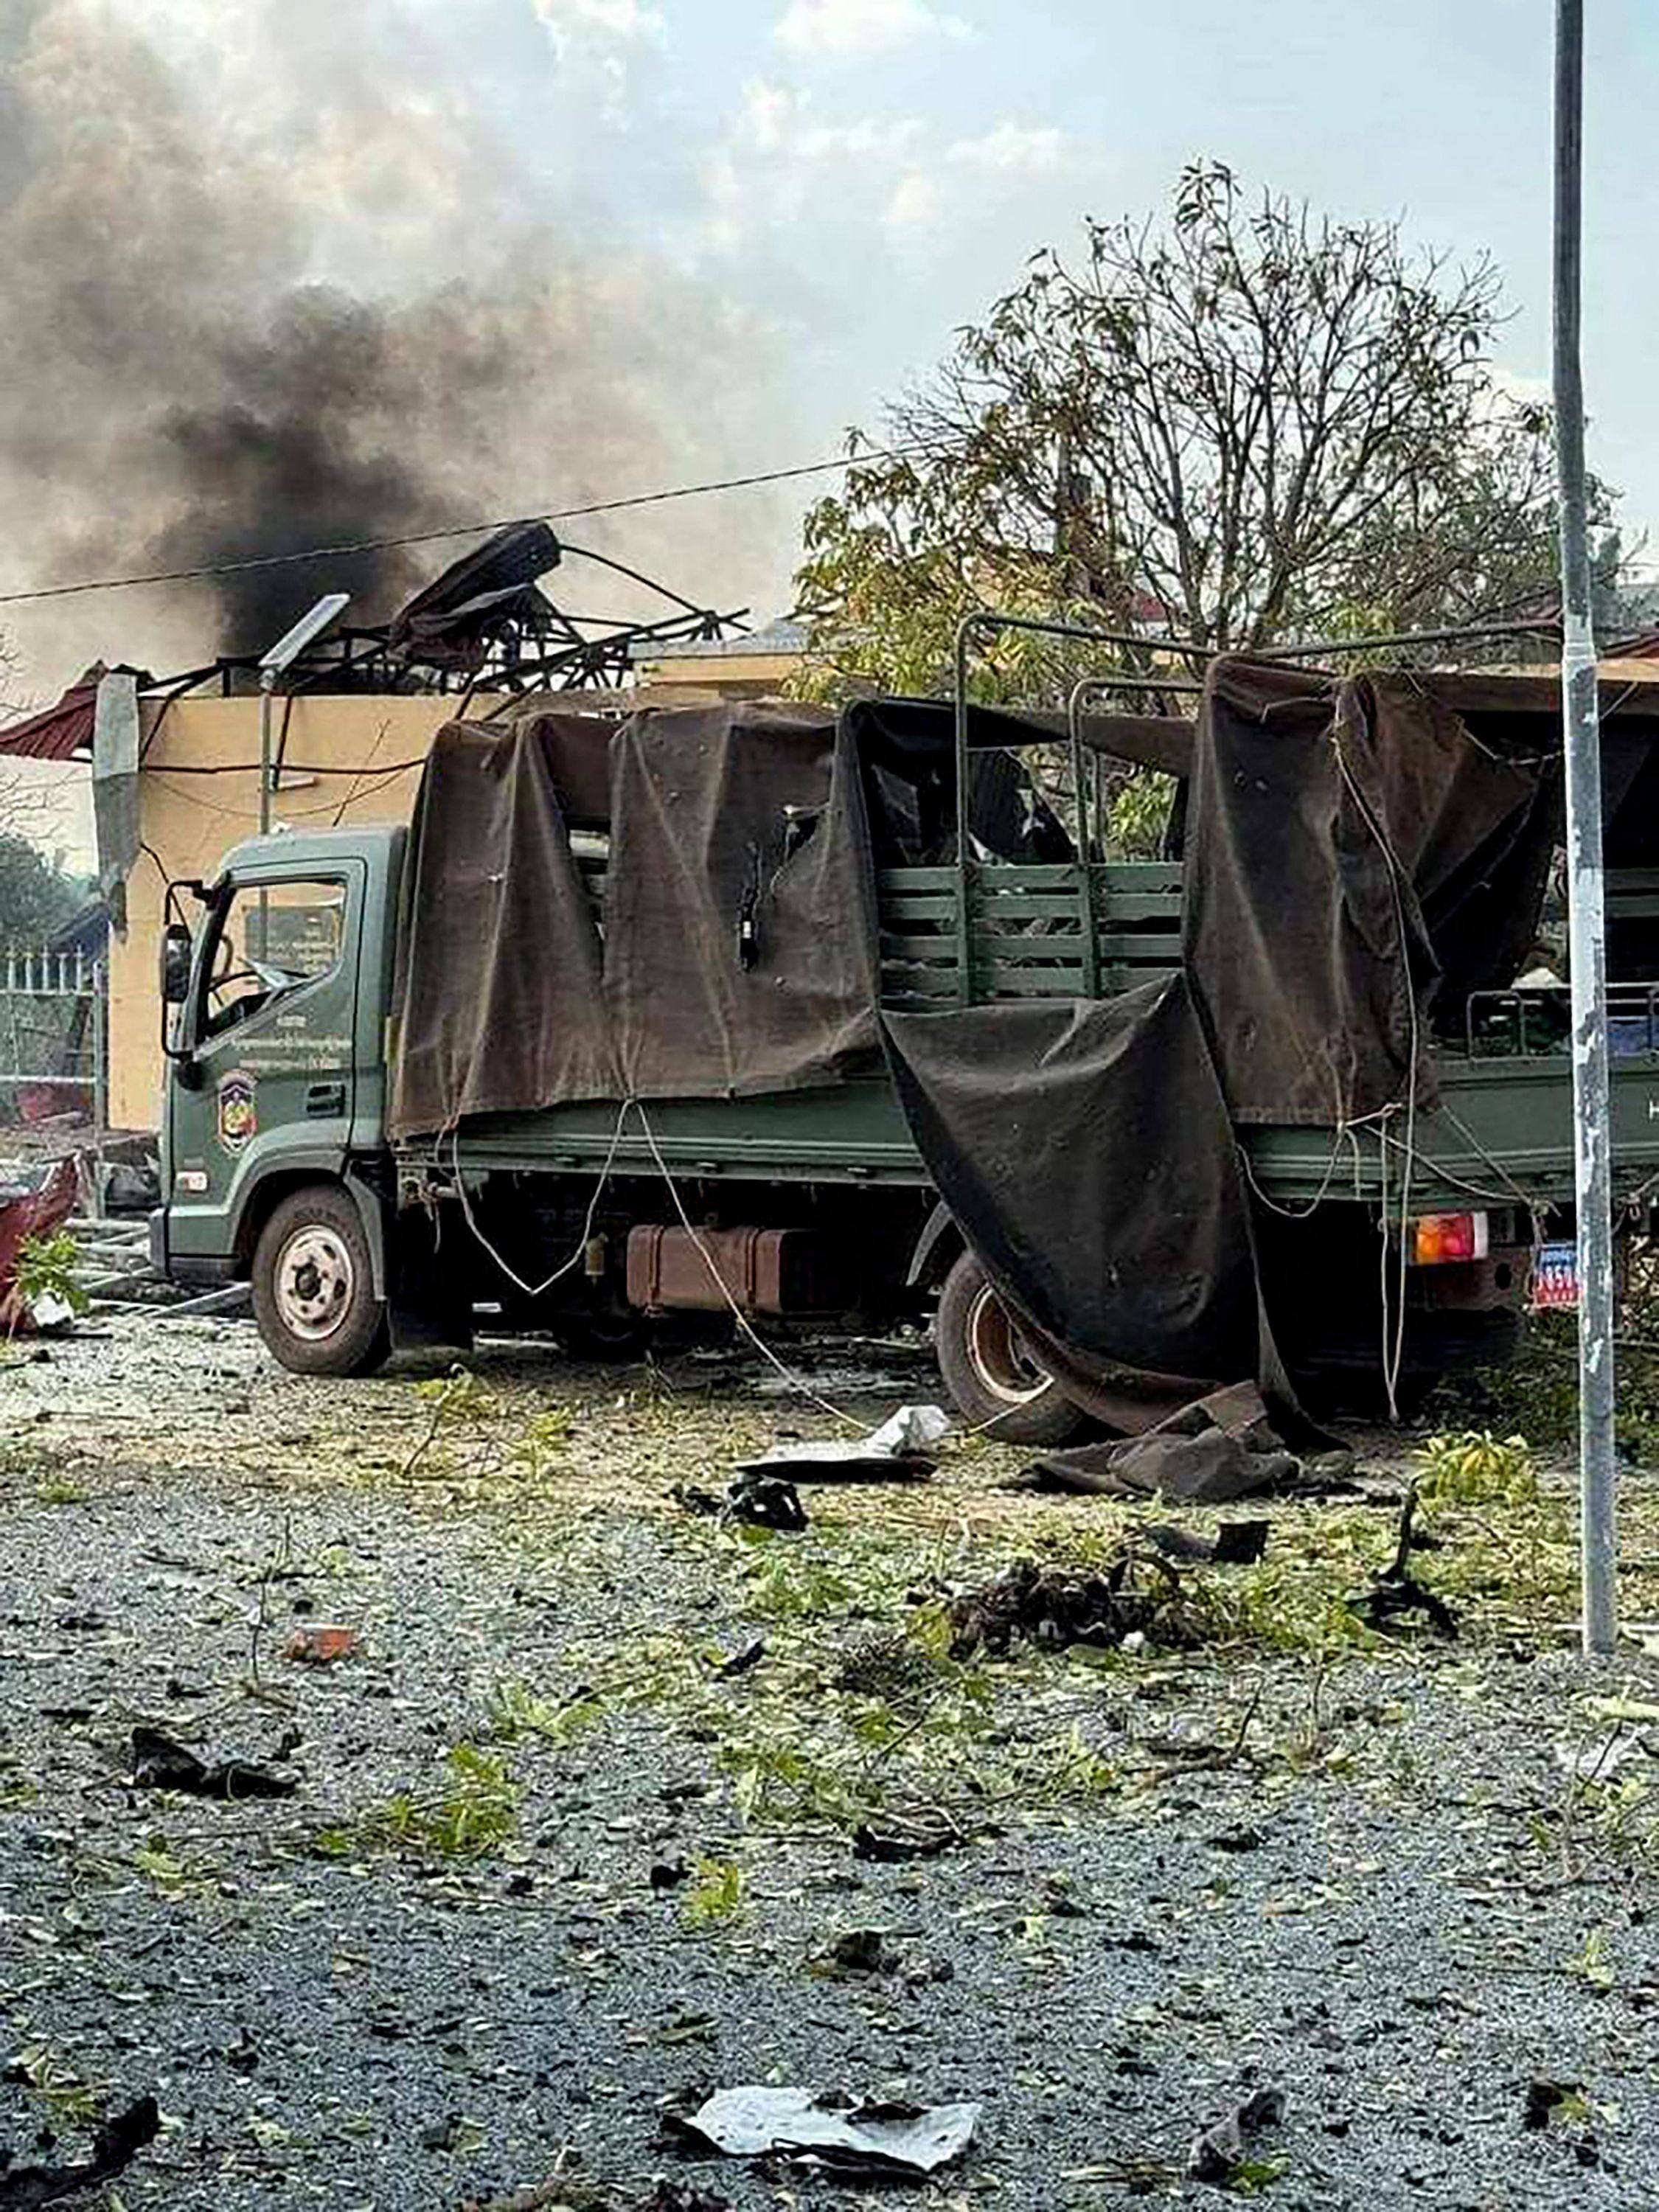 A military truck was damaged following an explosion at an army base in Cambodia’s Kampong Speu province on April 27. Photo: AFP